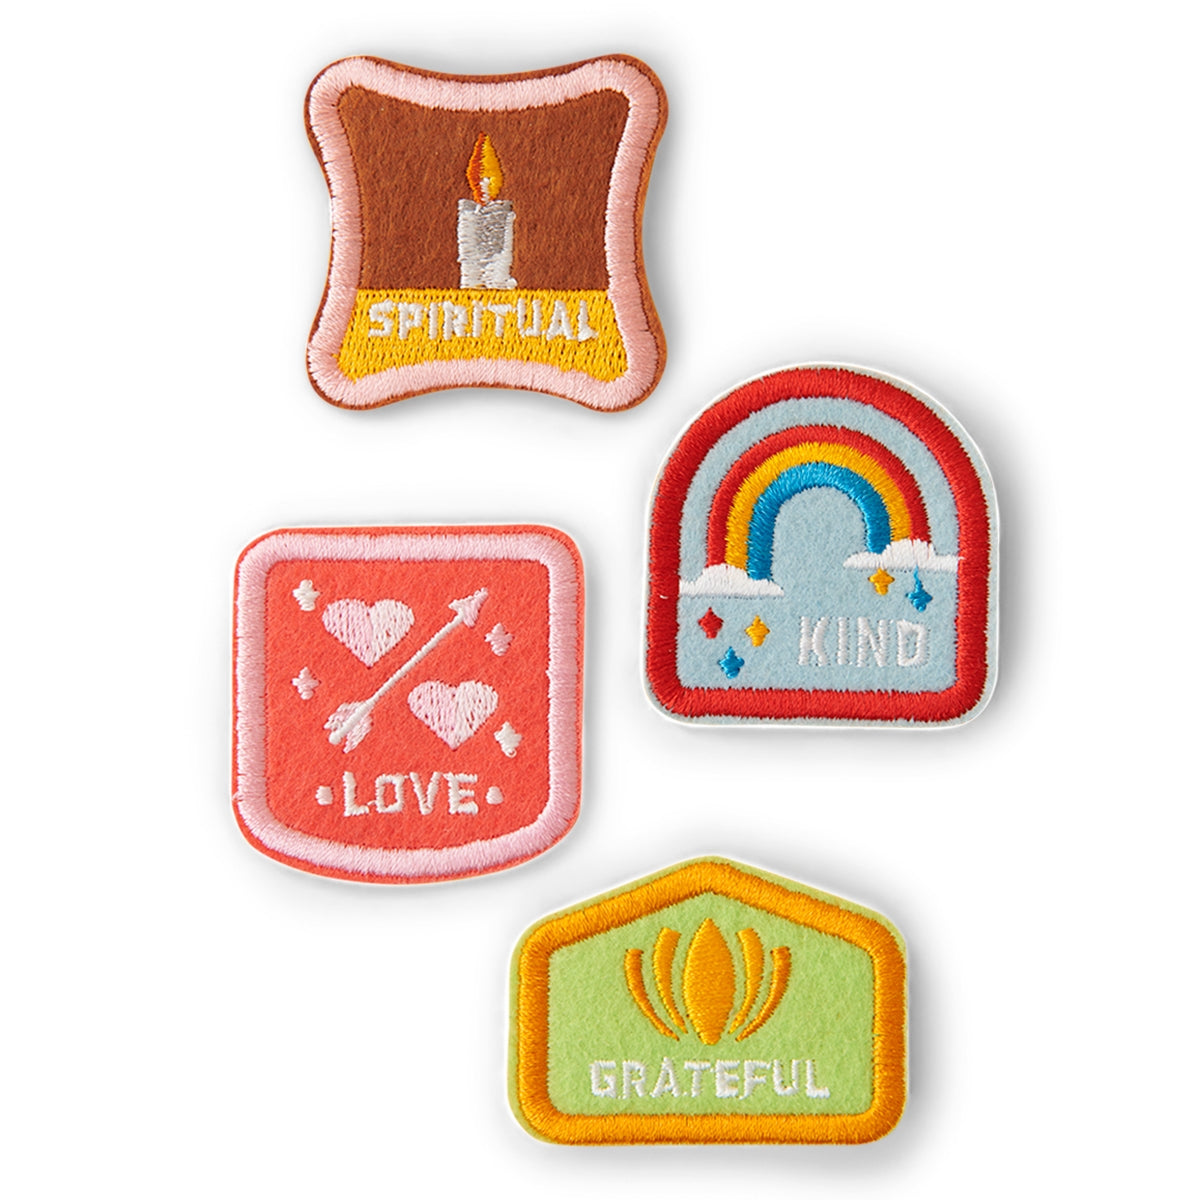 Set of 4 children's character badge patches featuring the traits Kind, Spiritual, Love, and Grateful, with adhesive and iron-on backing, perfect for customizing backpacks and clothing.